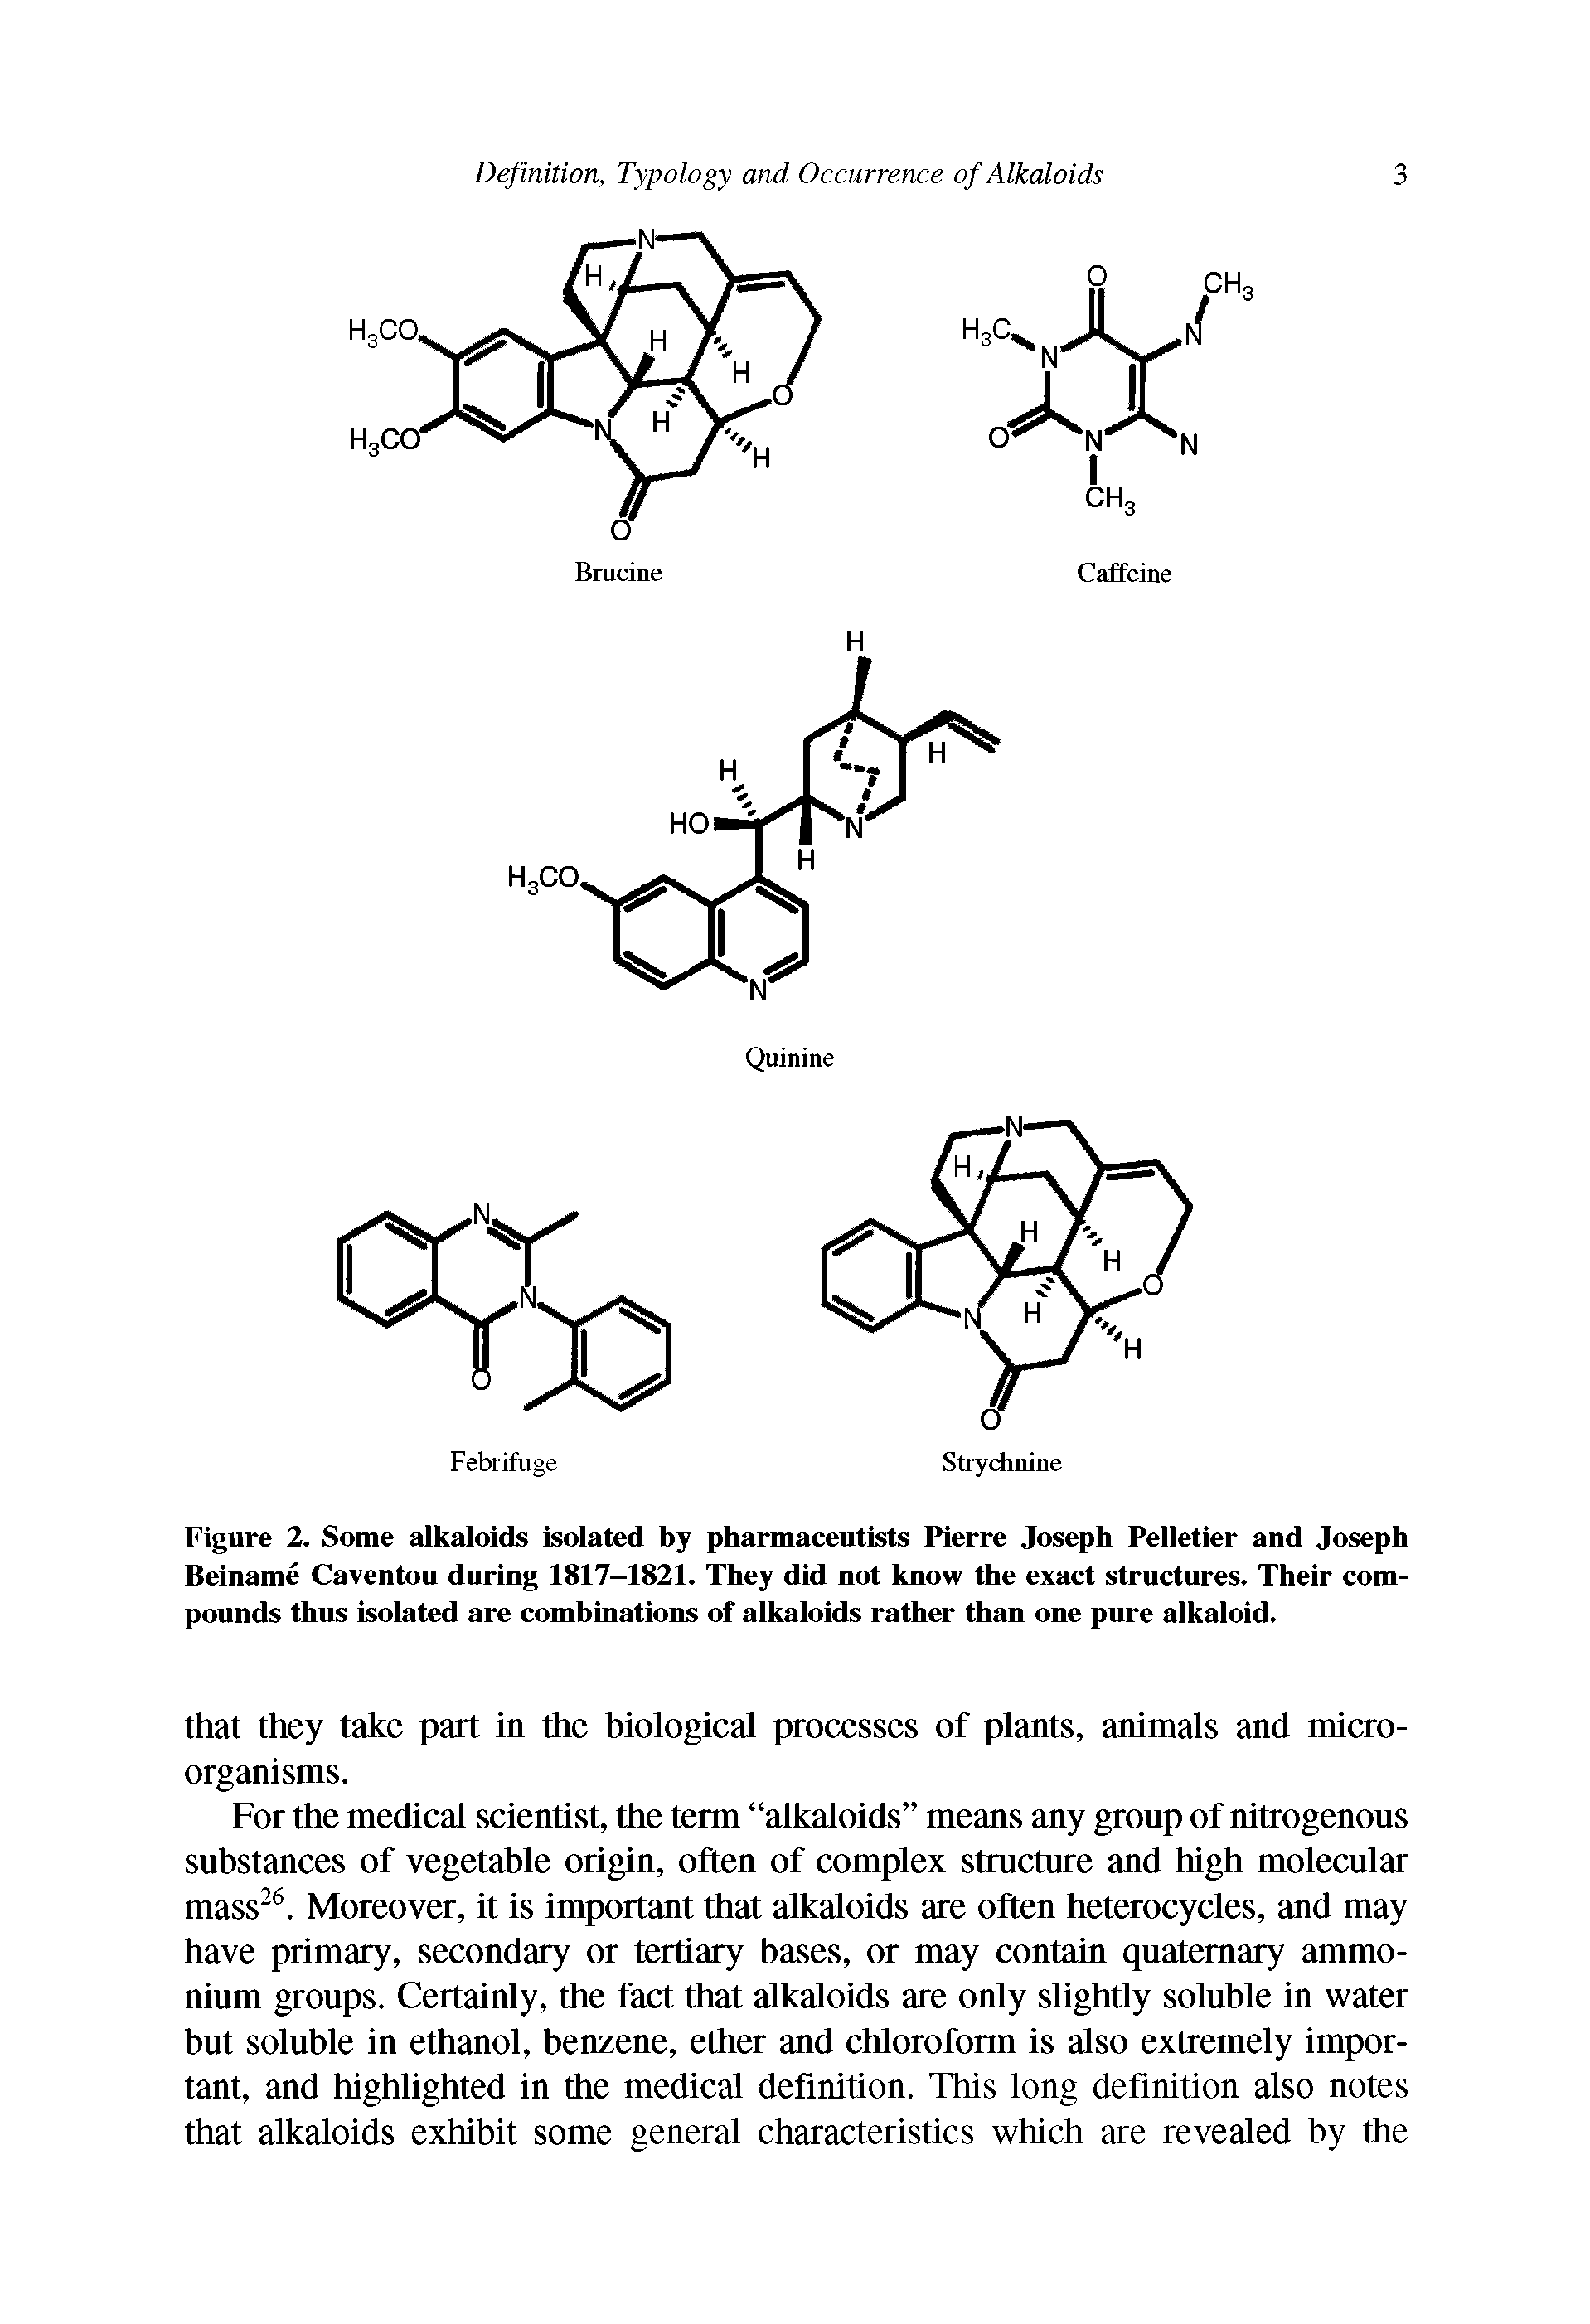 Figure 2. Some alkaloids isolated by pharmaceutists Pierre Joseph Pelletier and Joseph Beiname Caventou during 1817-1821. They did not know the exact structures. Their compounds thus isolated are combinations of alkaloids rather than one pure alkaloid.